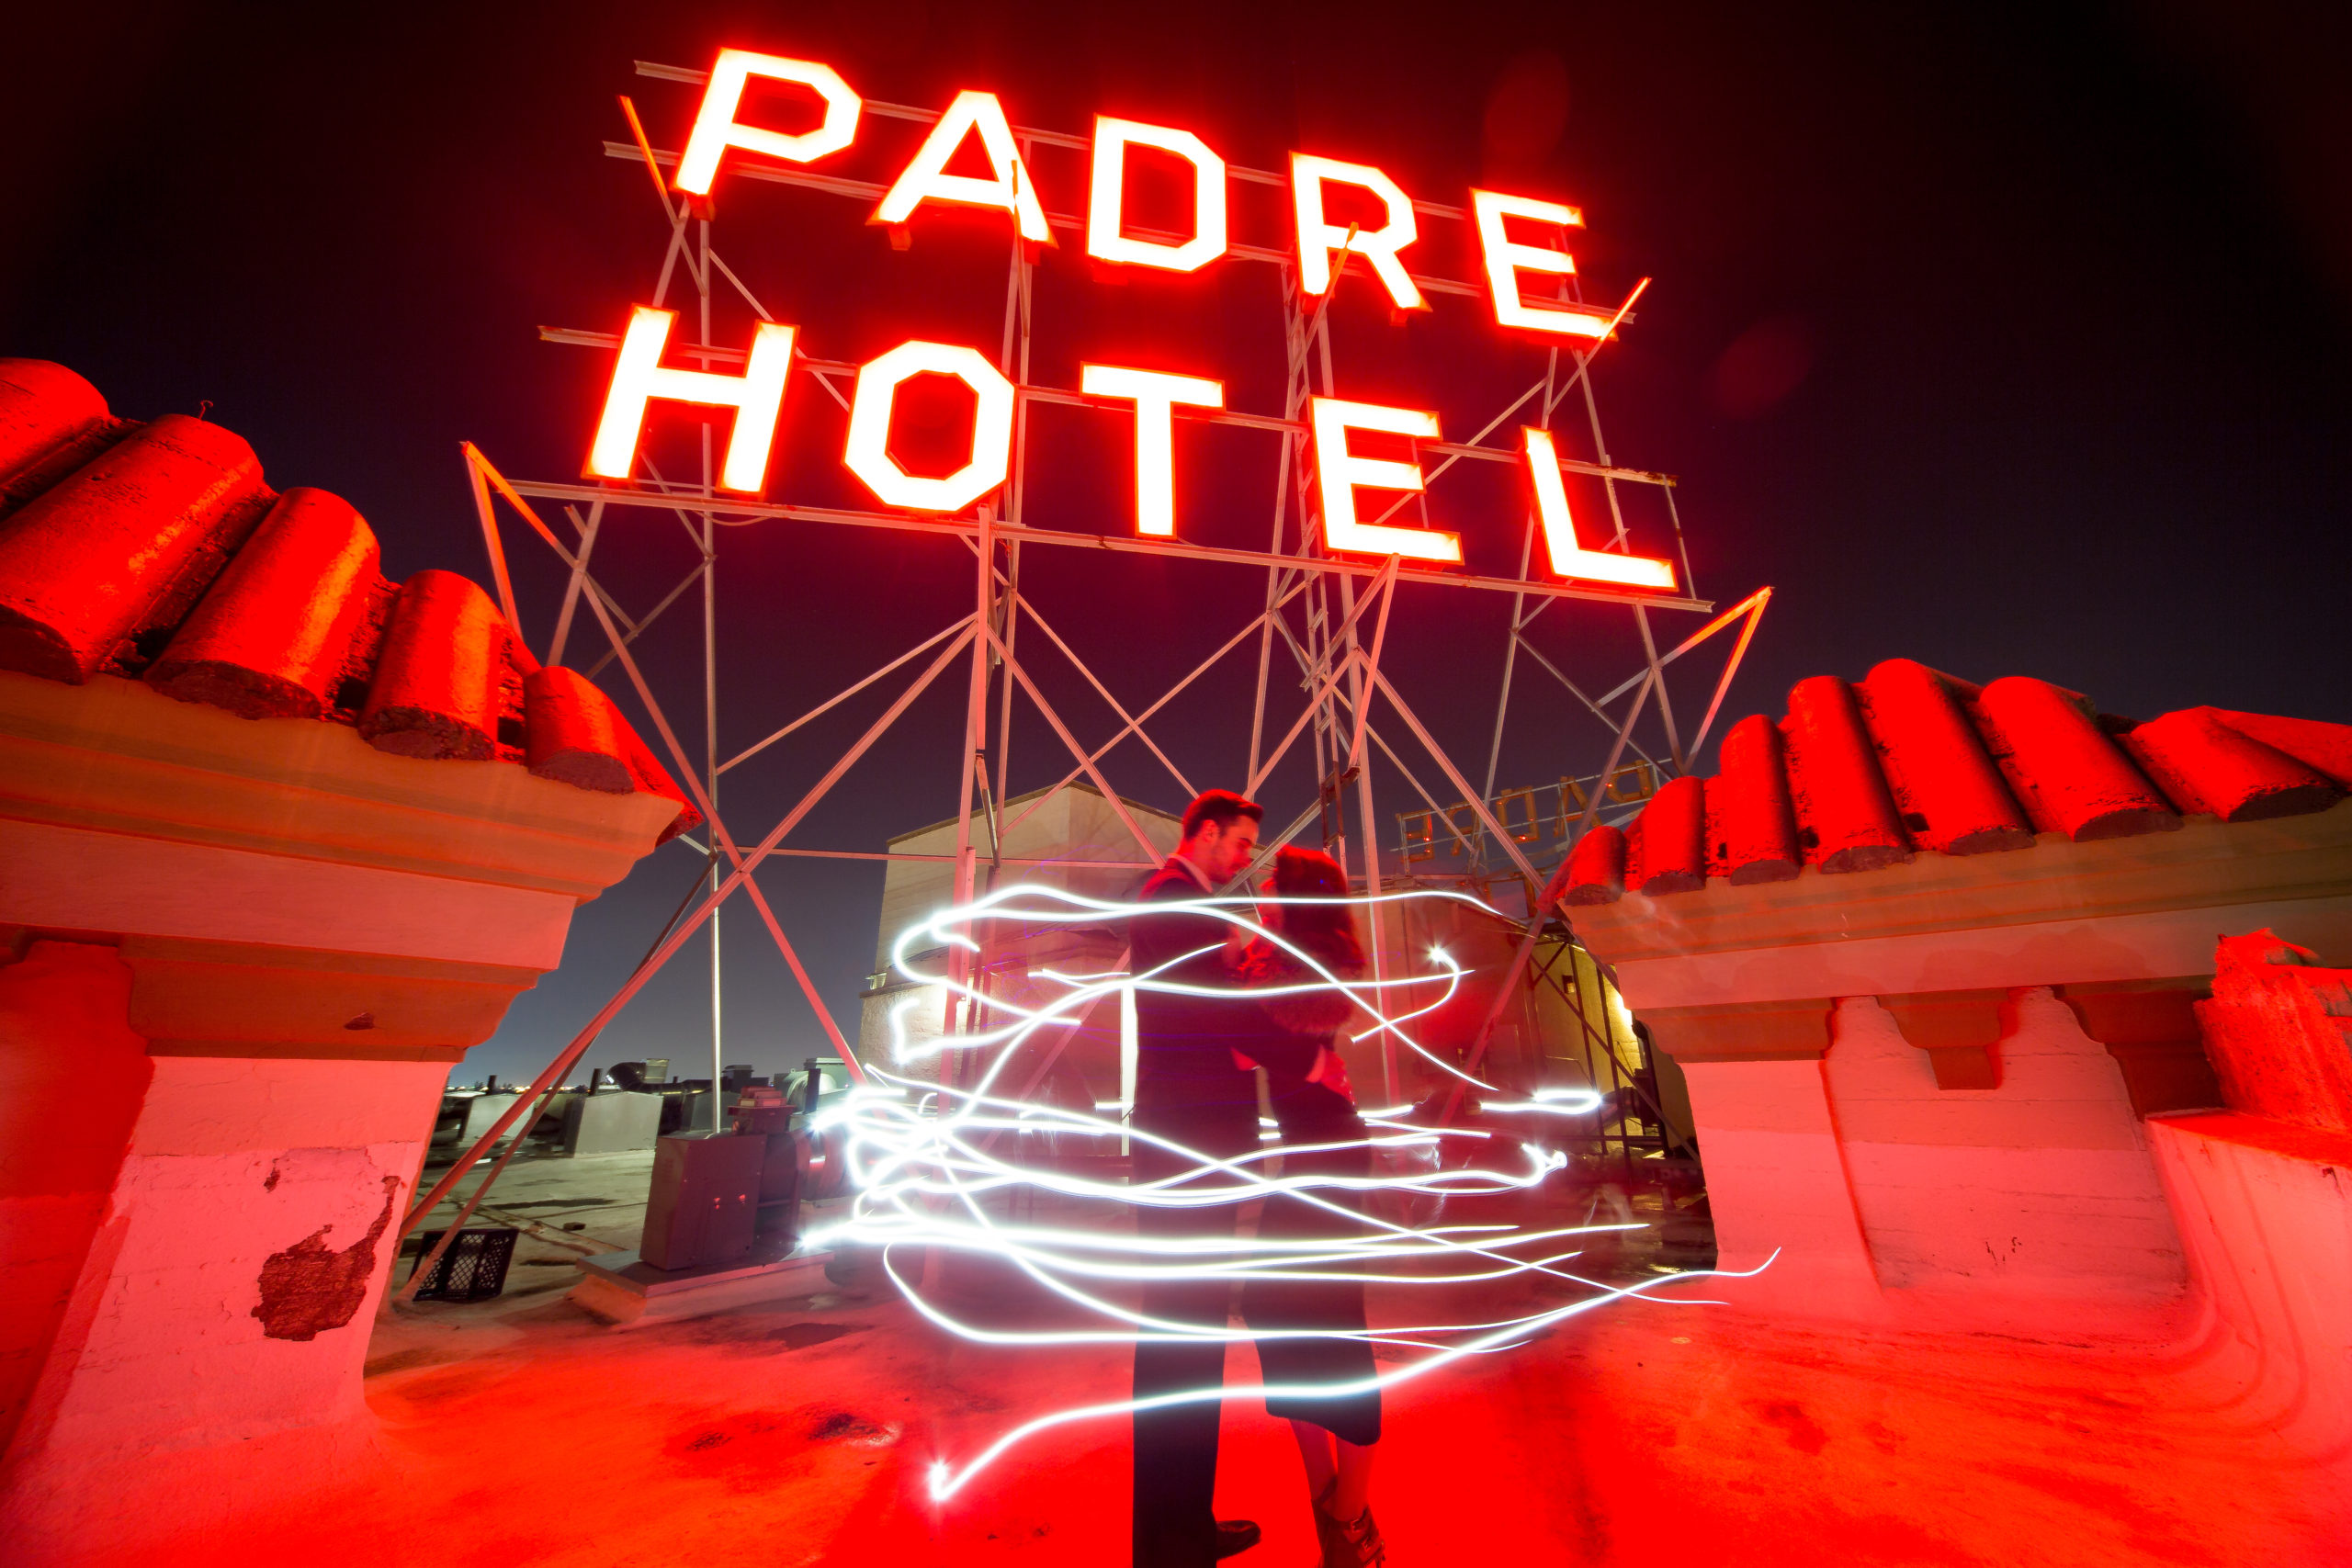 Rooftop Padre Hotel sign lit up in a red with couple standing in front of it